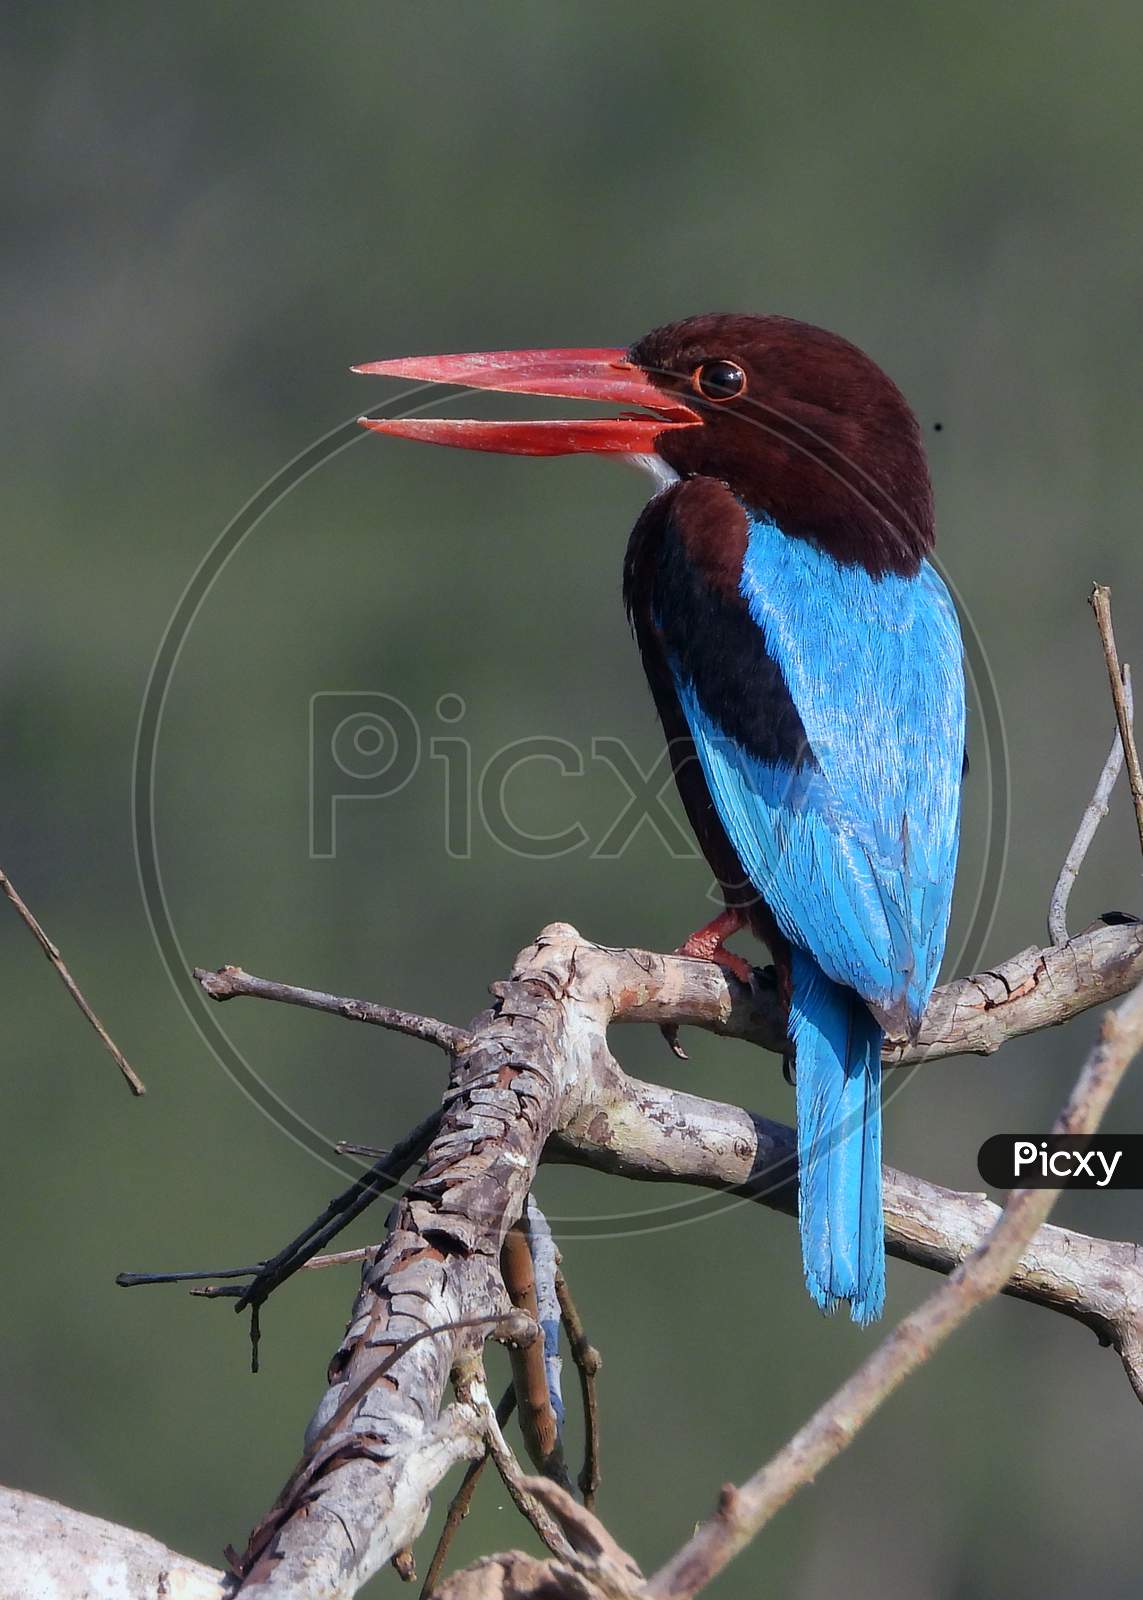 Andaman White-throated Kingfisher - Endemic subspecies